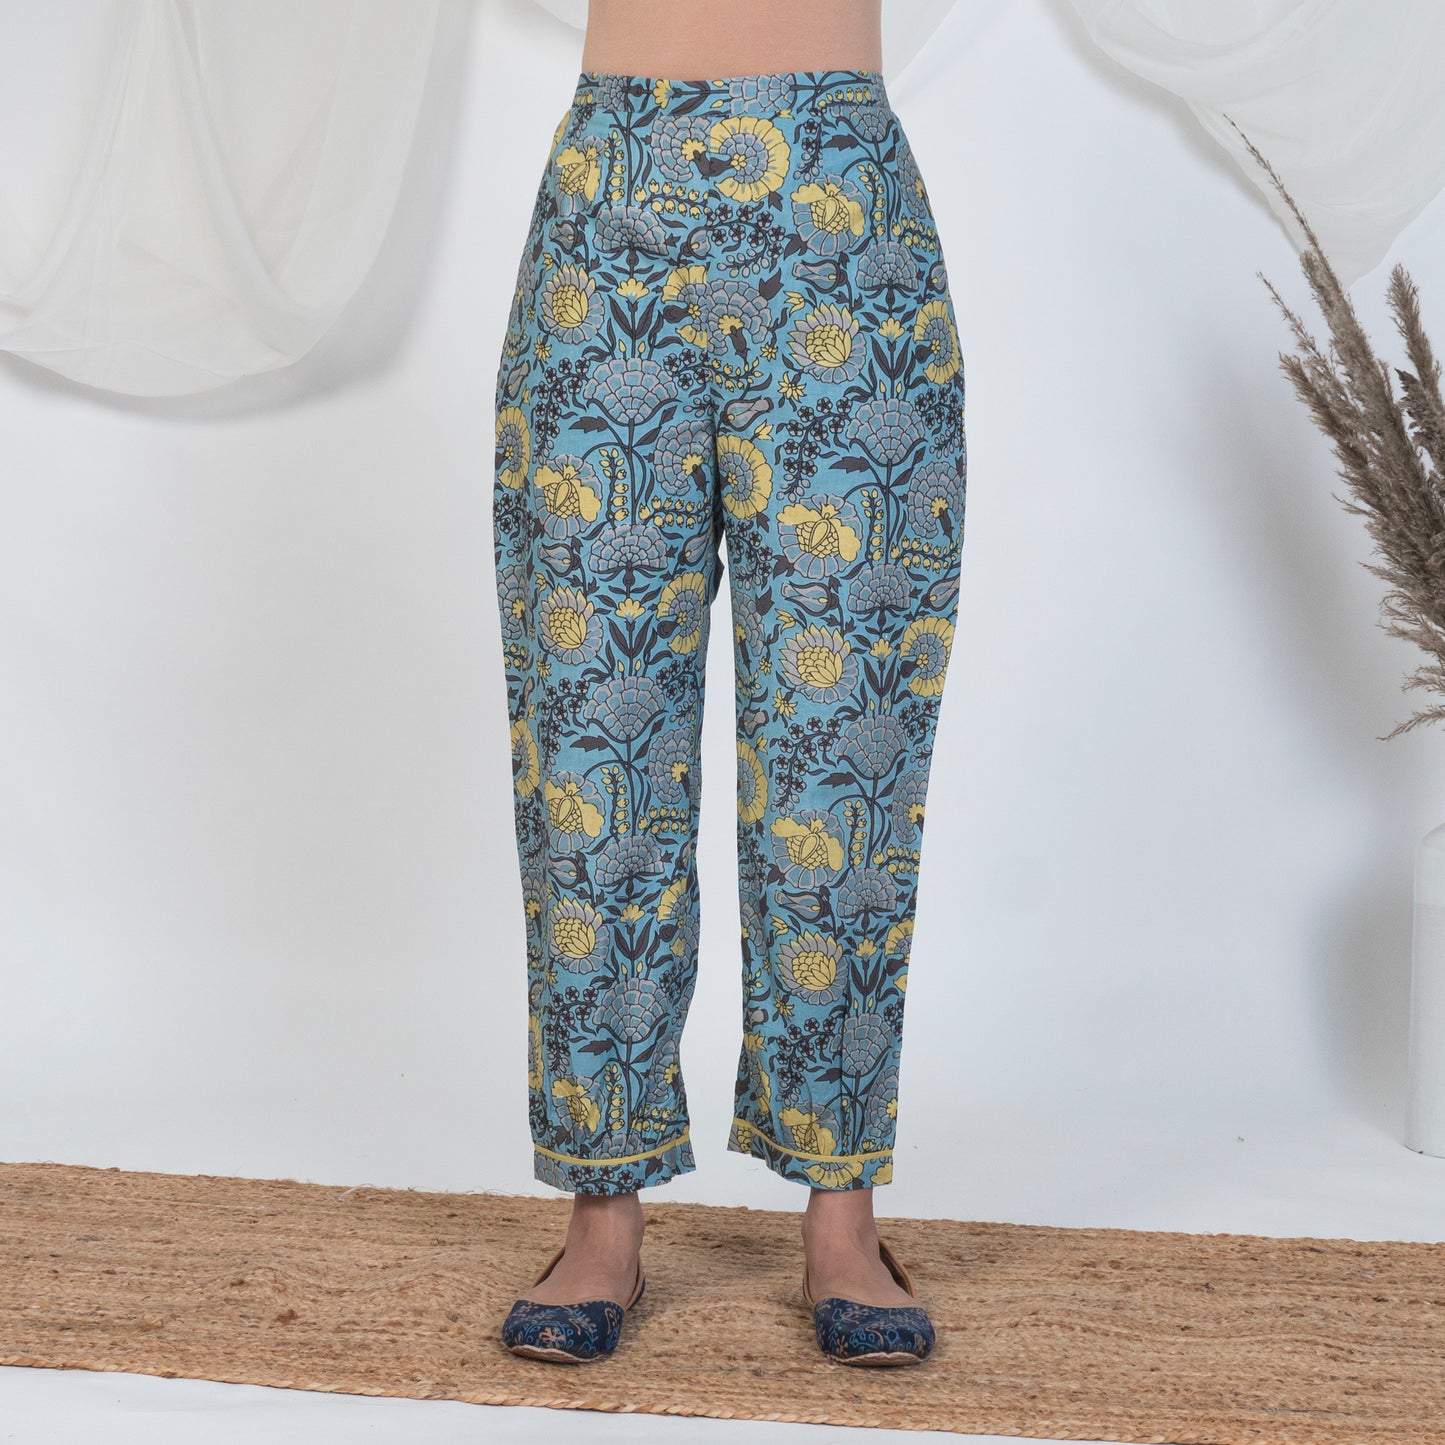 Irani Pants in Blue and Yellow